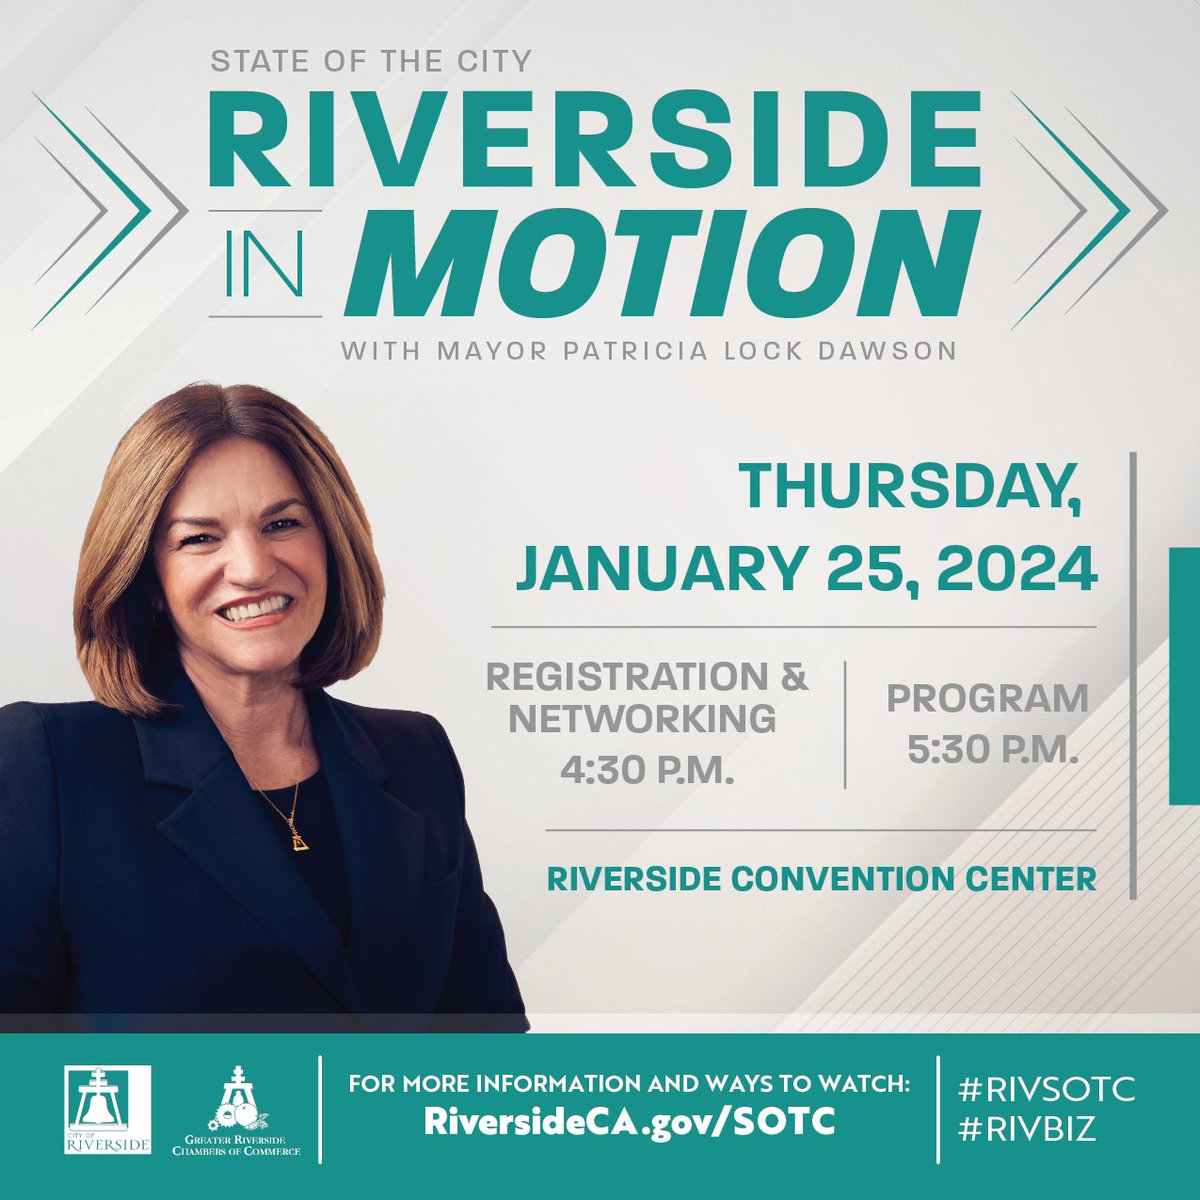 Join us at the Riverside Convention Center on Thursday, January 25, 2024, for @mayorlockdawson's State of the City Address. Discover and explore opportunities to be part of the excitement in Riverside in the upcoming year! Learn more at RiversideCA.gov/SOTC.